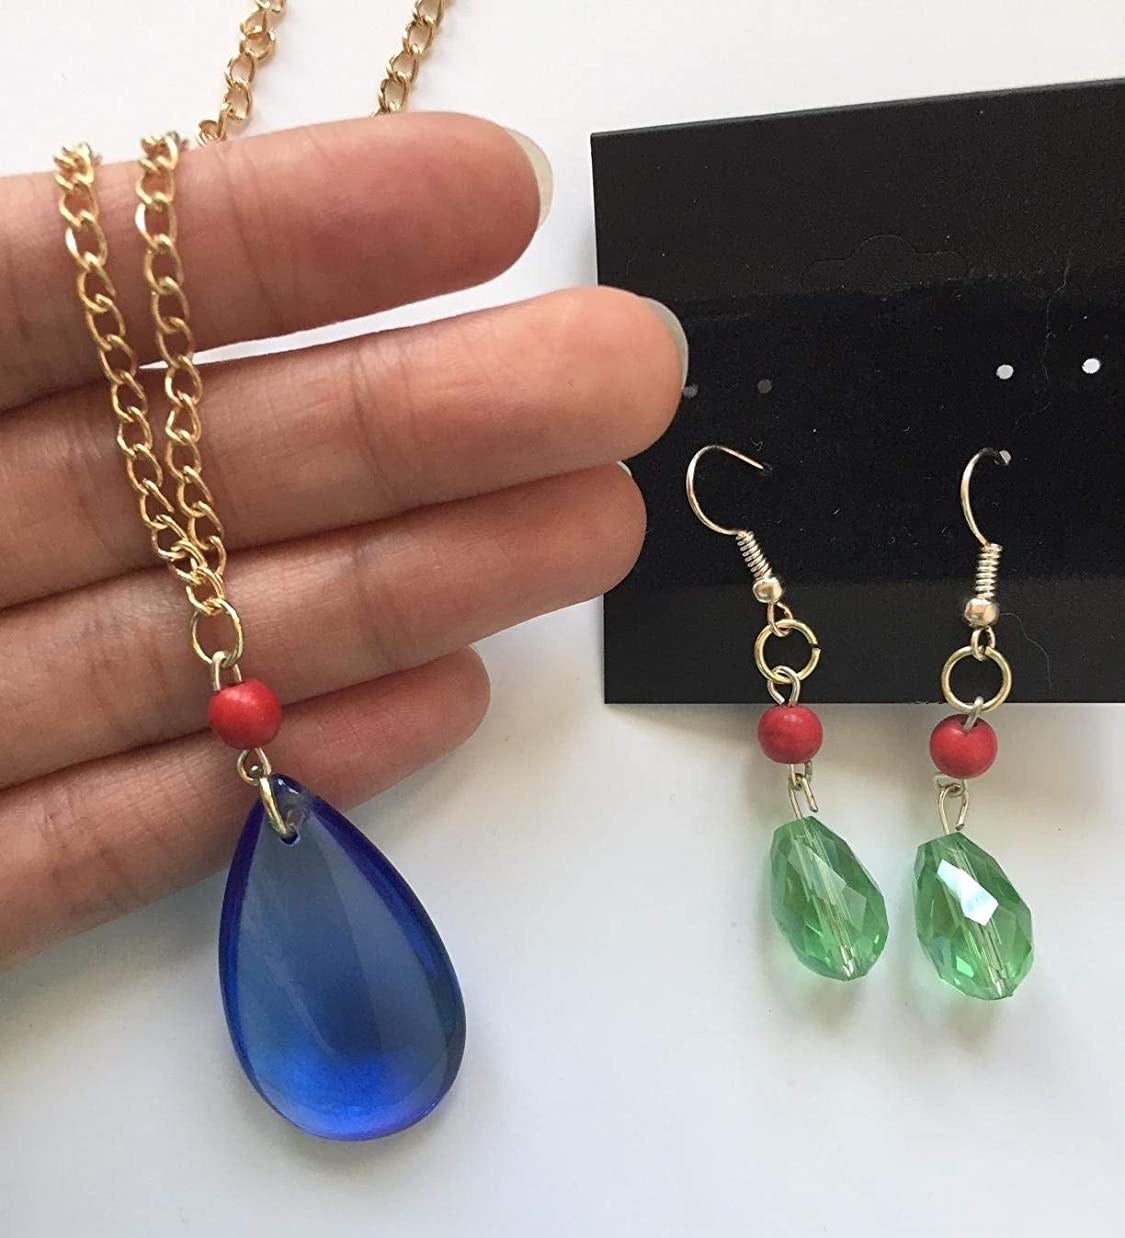 hand holding the blue teardrop necklace next to the green drop earrings